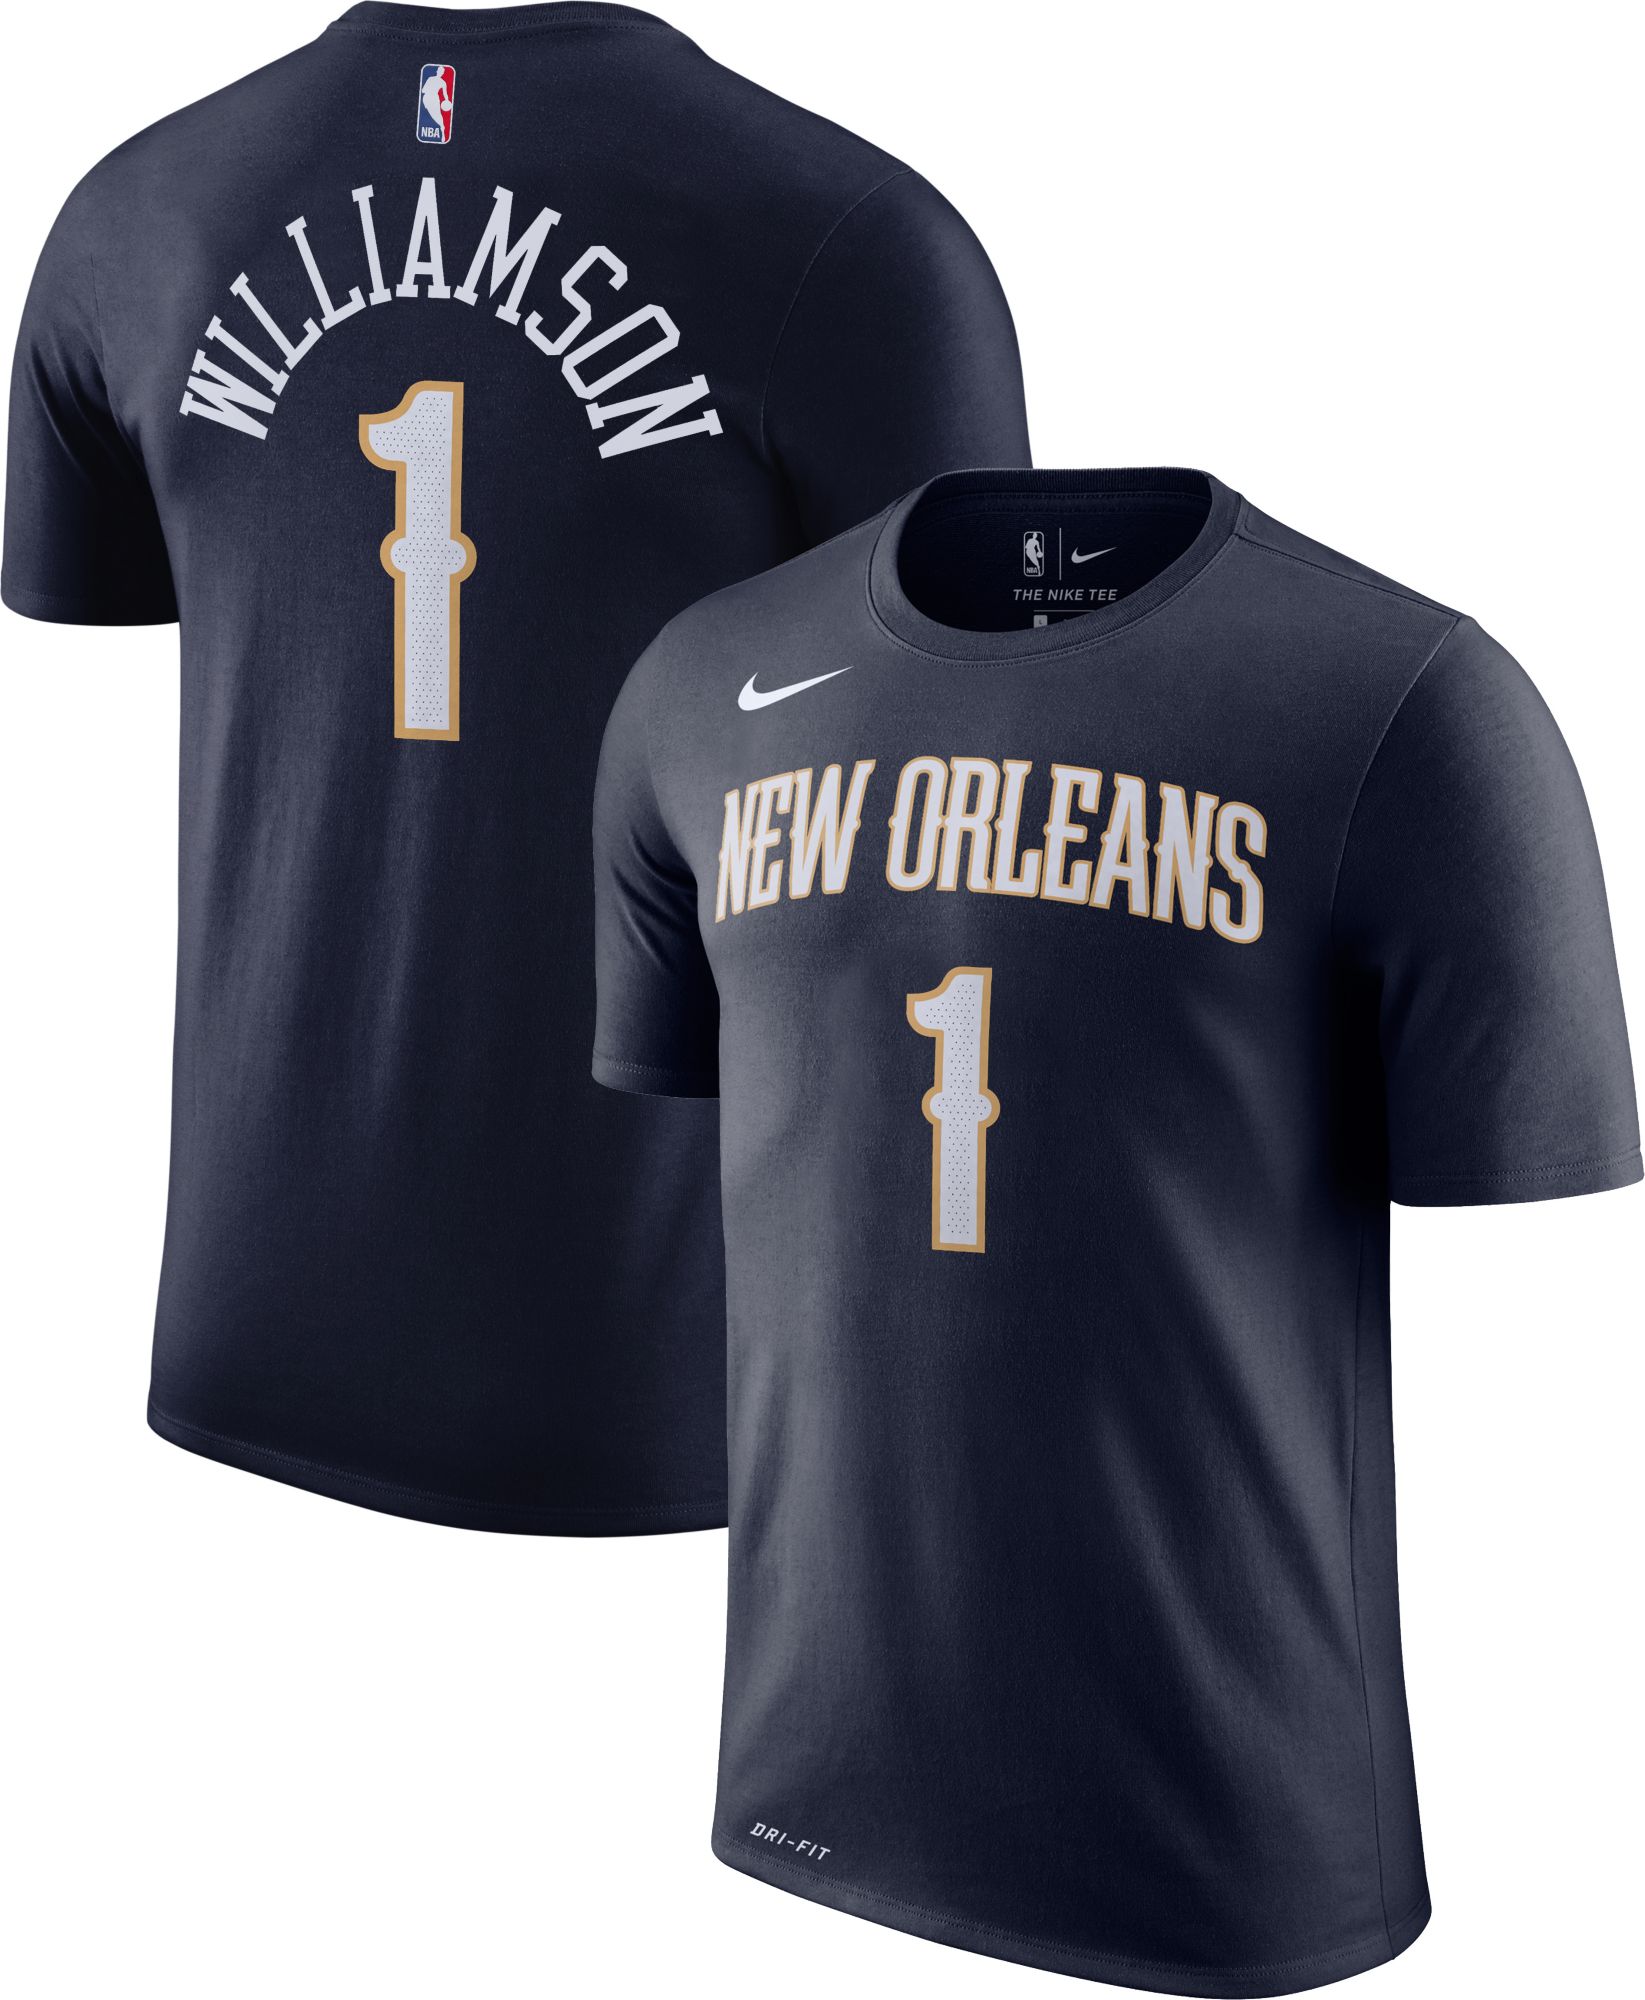 zion williamson jersey youth